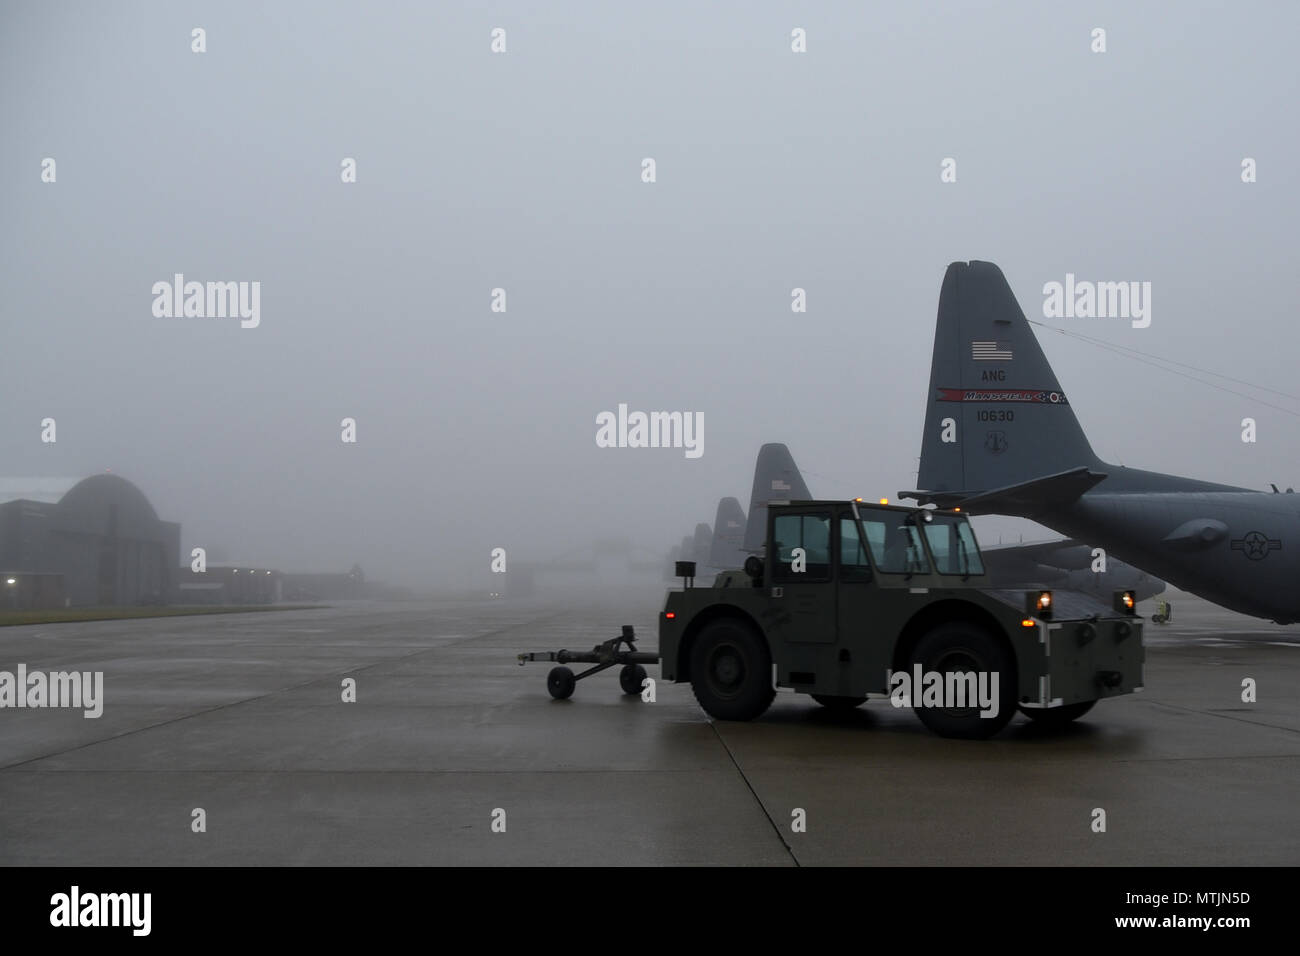 Master Sgt. Kristopher Wolf drives a tow motor through a blanket of fog Jan. 3, 2017, on the flightline at the 179th Airlift Wing, Mansfield, Ohio. The 179th Airlift Wing is always on a mission to be the first choice to respond to community, state and federal missions with a trusted team of highly qualified Airmen. (U.S. Air National Guard photo by Airman Megan Shepherd/Released) Stock Photo